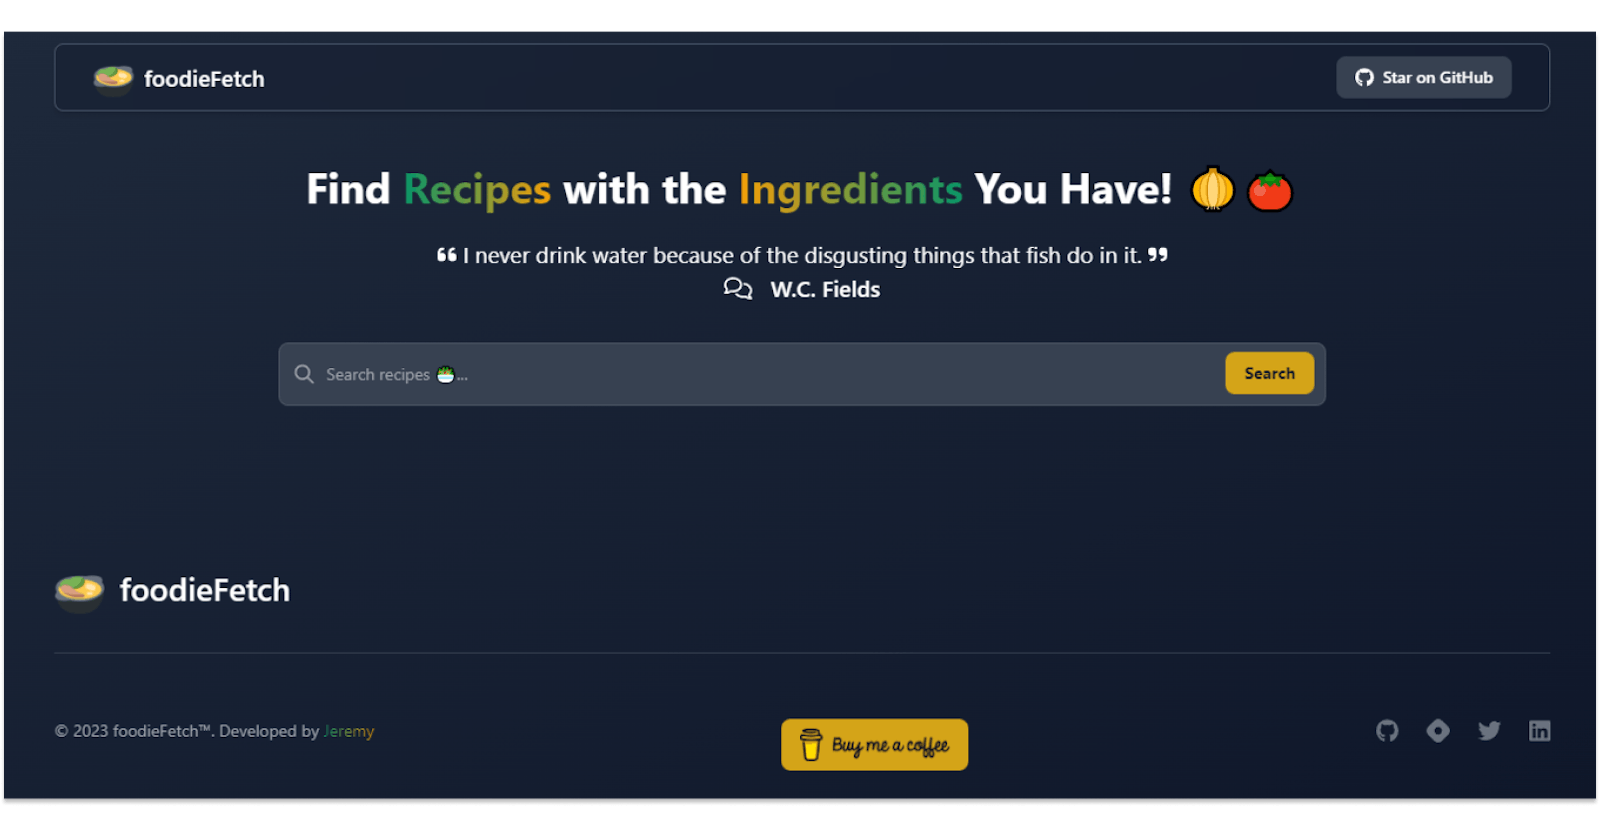 Building a Food Recipe App with Tailwind CSS and Vanilla JavaScript